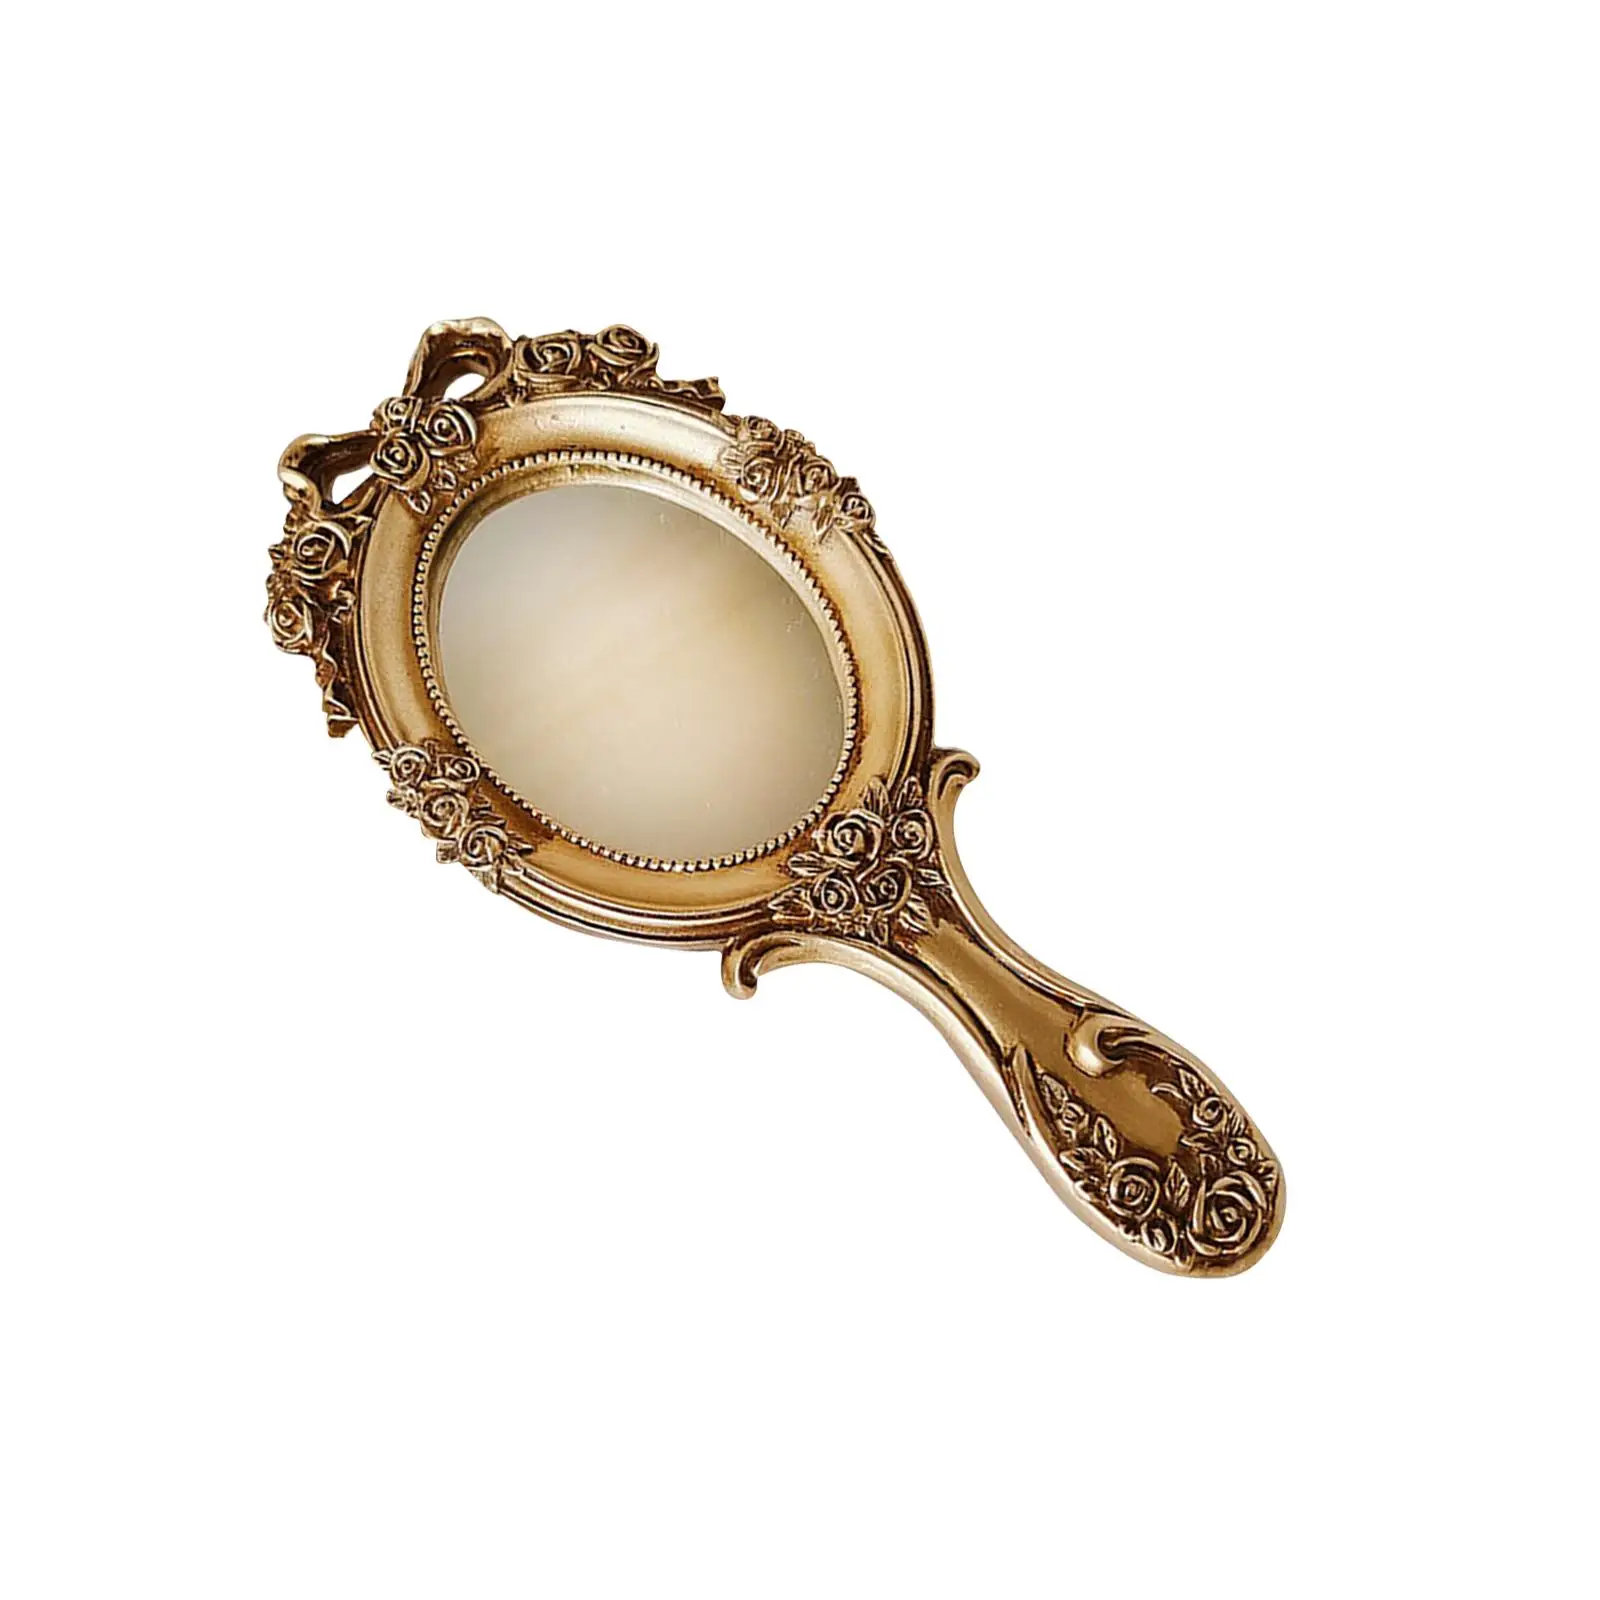 Vintage Hand Mirror Beauty Decorative Makeup Mirror for Travel